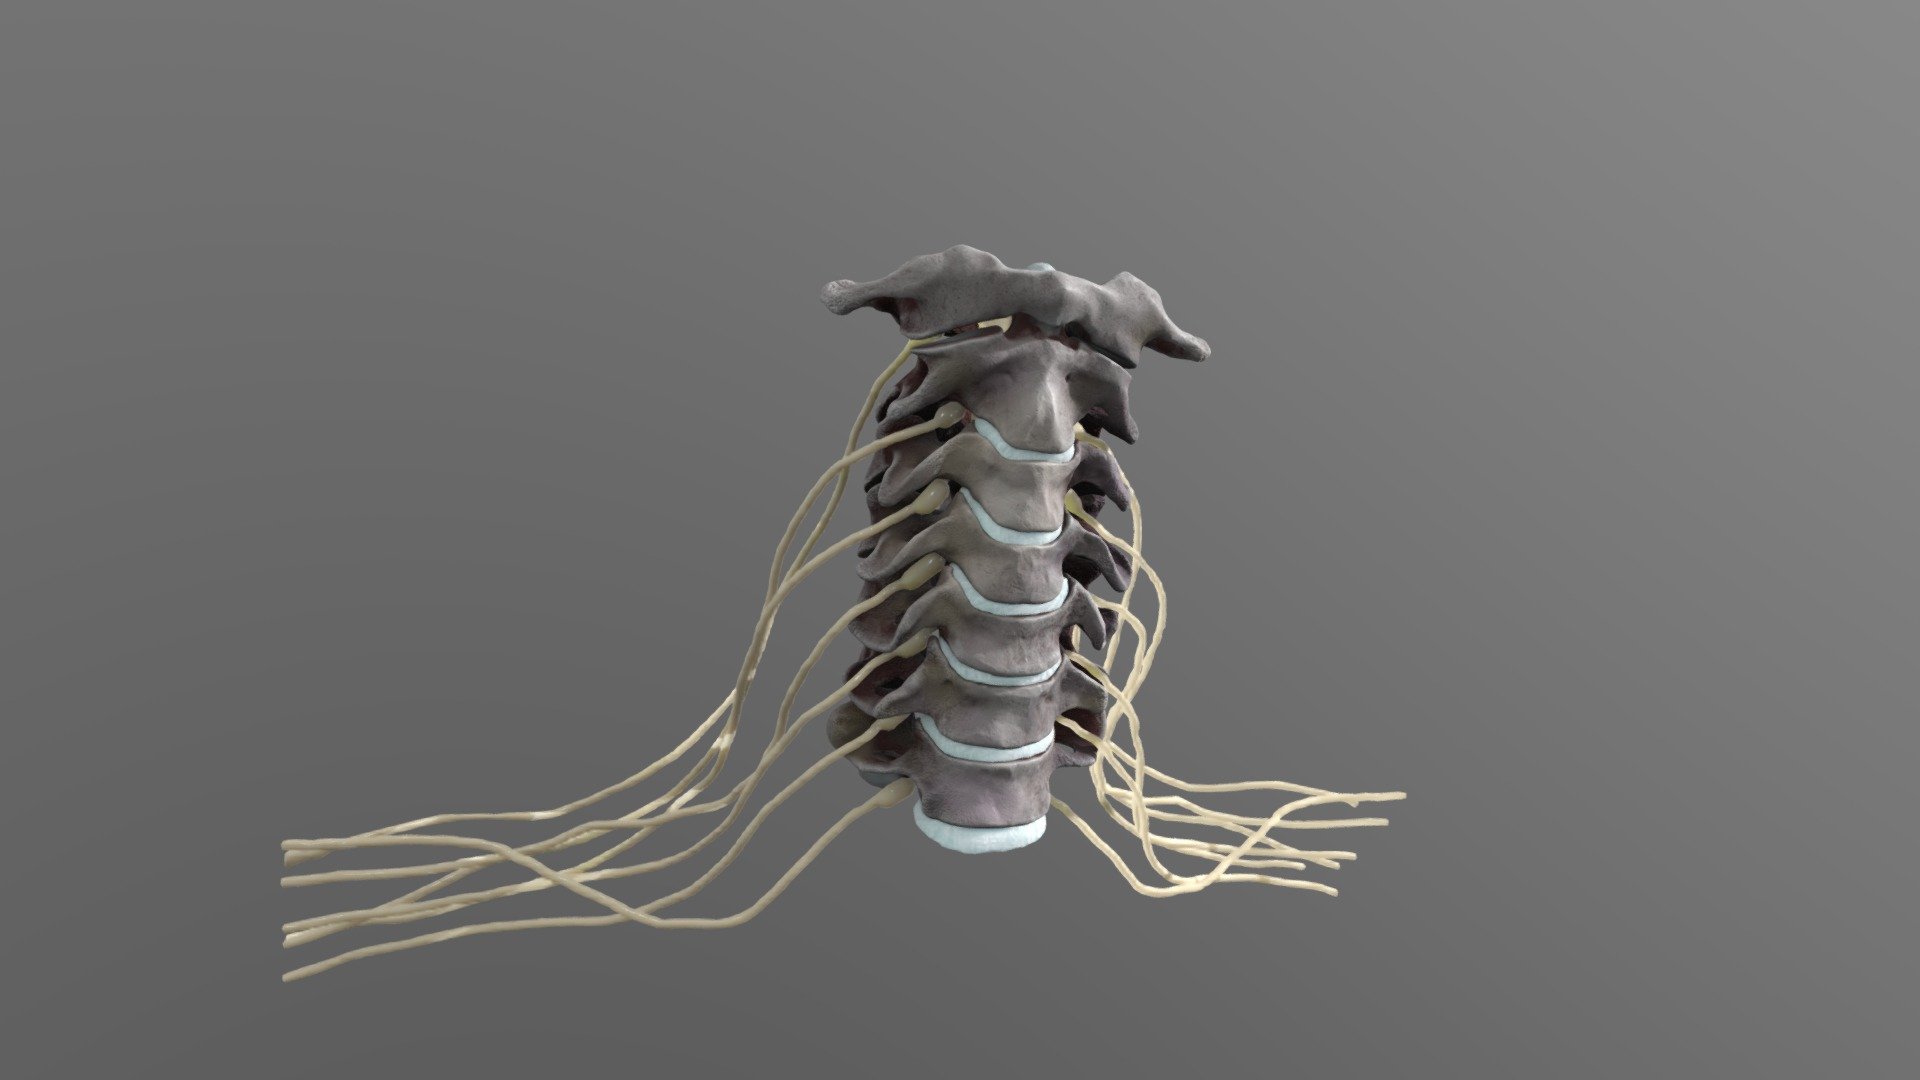 This is the adult cervical spine system, including C1 to C7 bones, intervertebral discs, and central nerves. I made 3D modeling based on many real anatomical photos to pursue film-level detail and fidelity - cervical spine central nervous system Anatomy - Buy Royalty Free 3D model by haibo (@haibo545001) 3d model